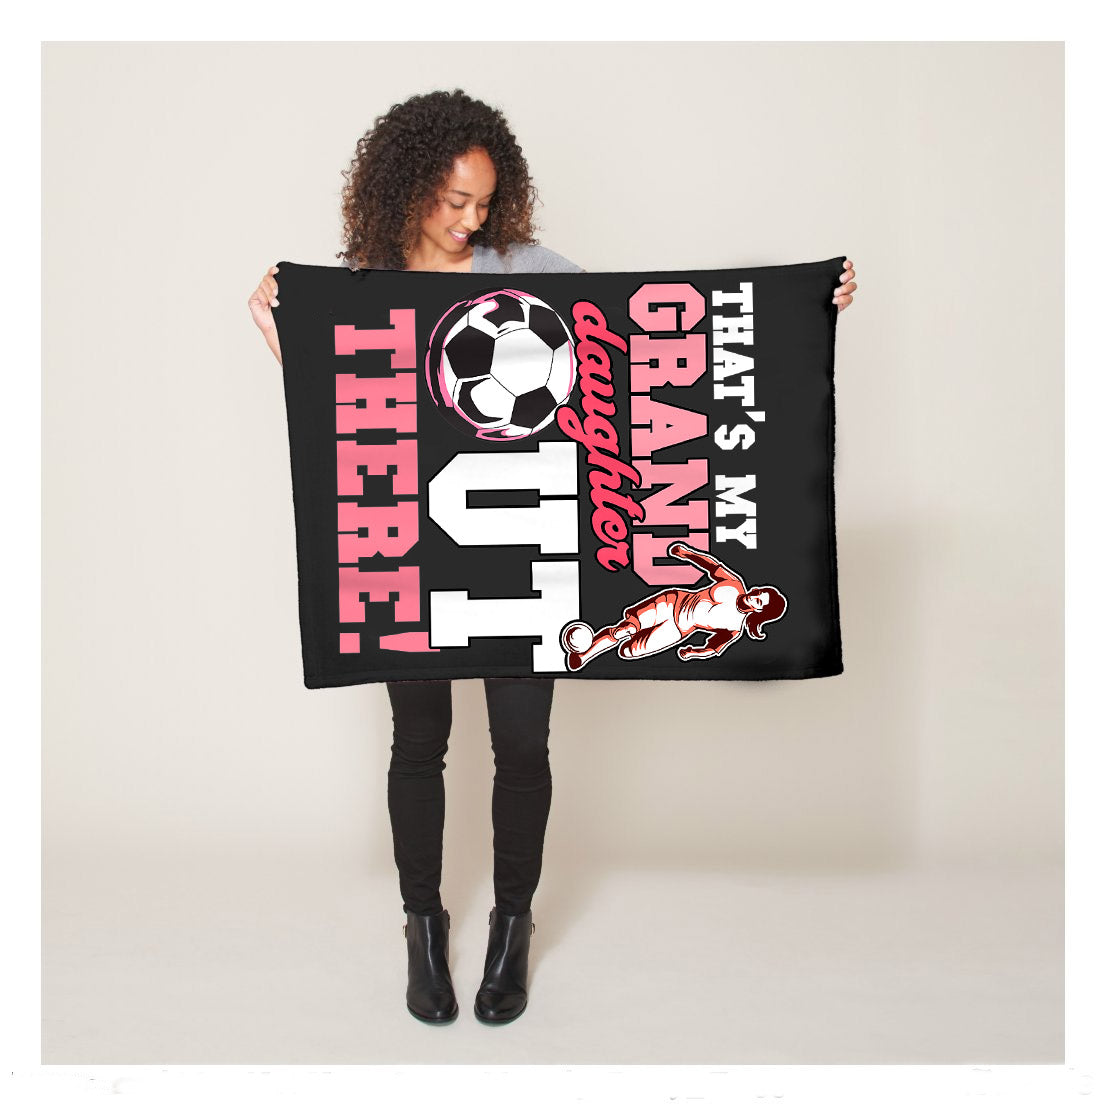 Thats My Granddaughter Out There Soccer Sherpa Blanket,  Soccer Blankets, Soccer Gifts, Happy Fathers Day Gift Ideas For Granddaughter